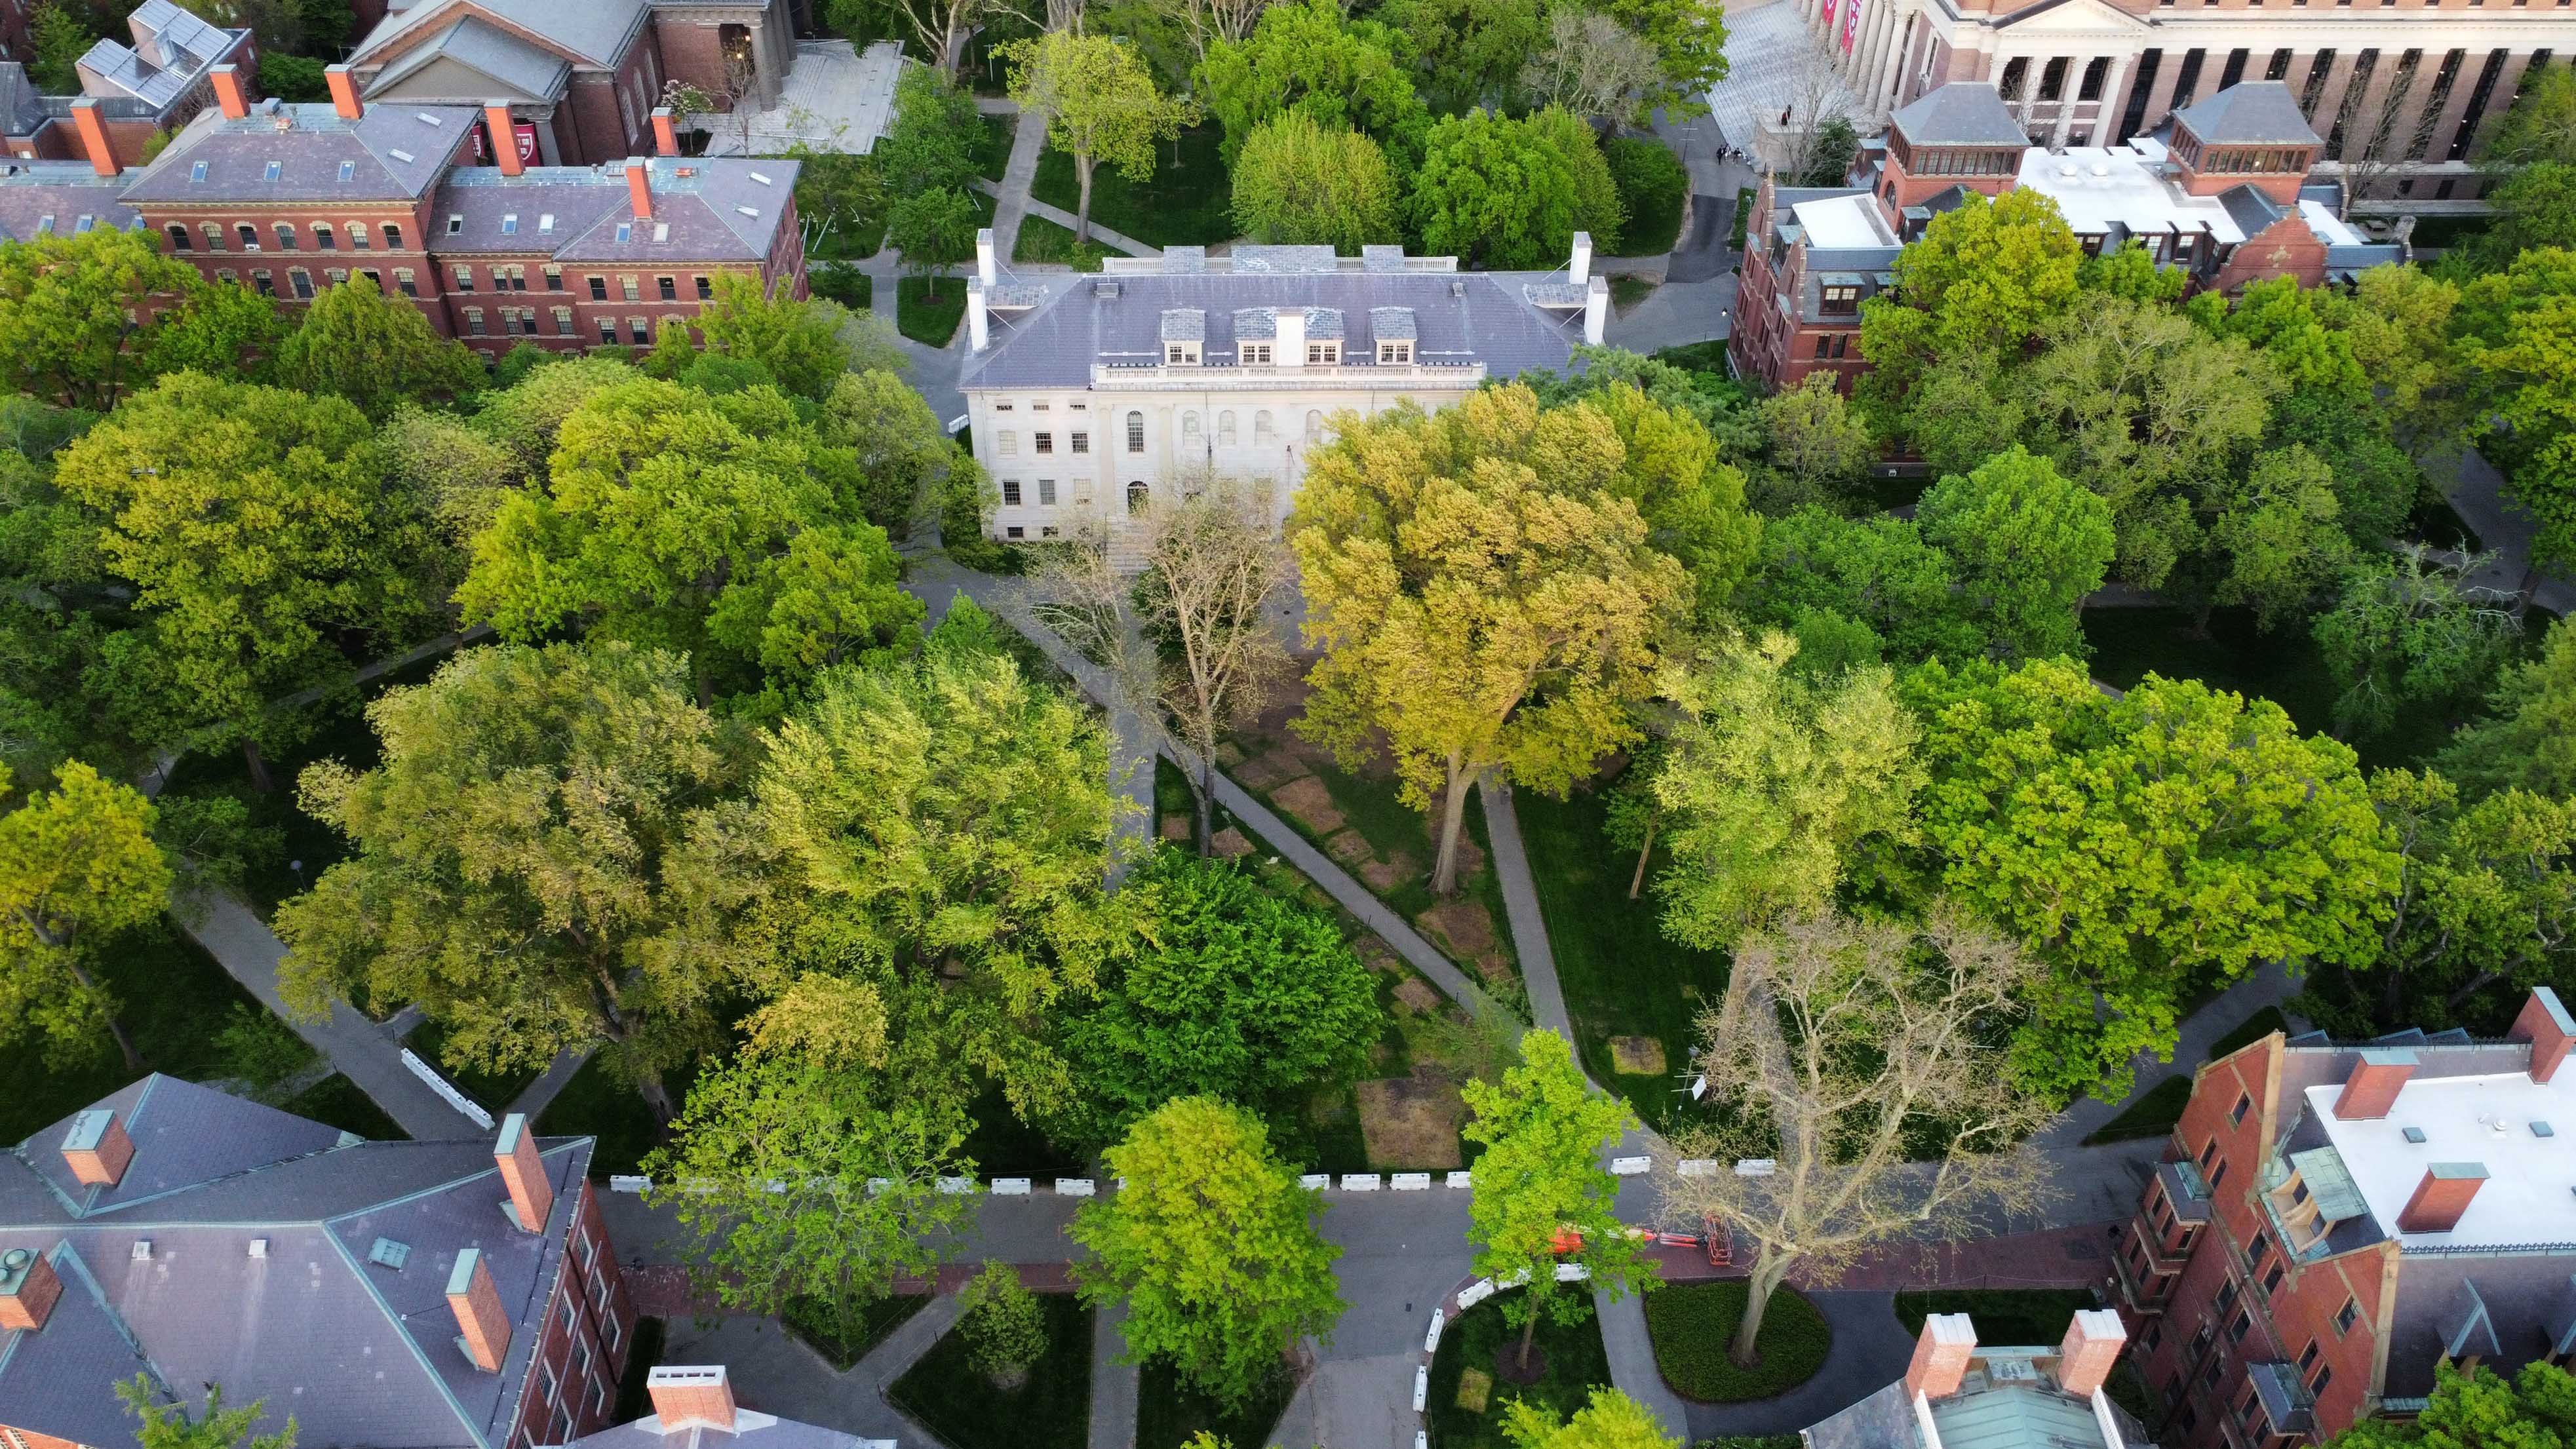 From above, patches of dirt where the tents of the encampment used to stand are visible on the lawn in front of the John Harvard statue and University Hall.